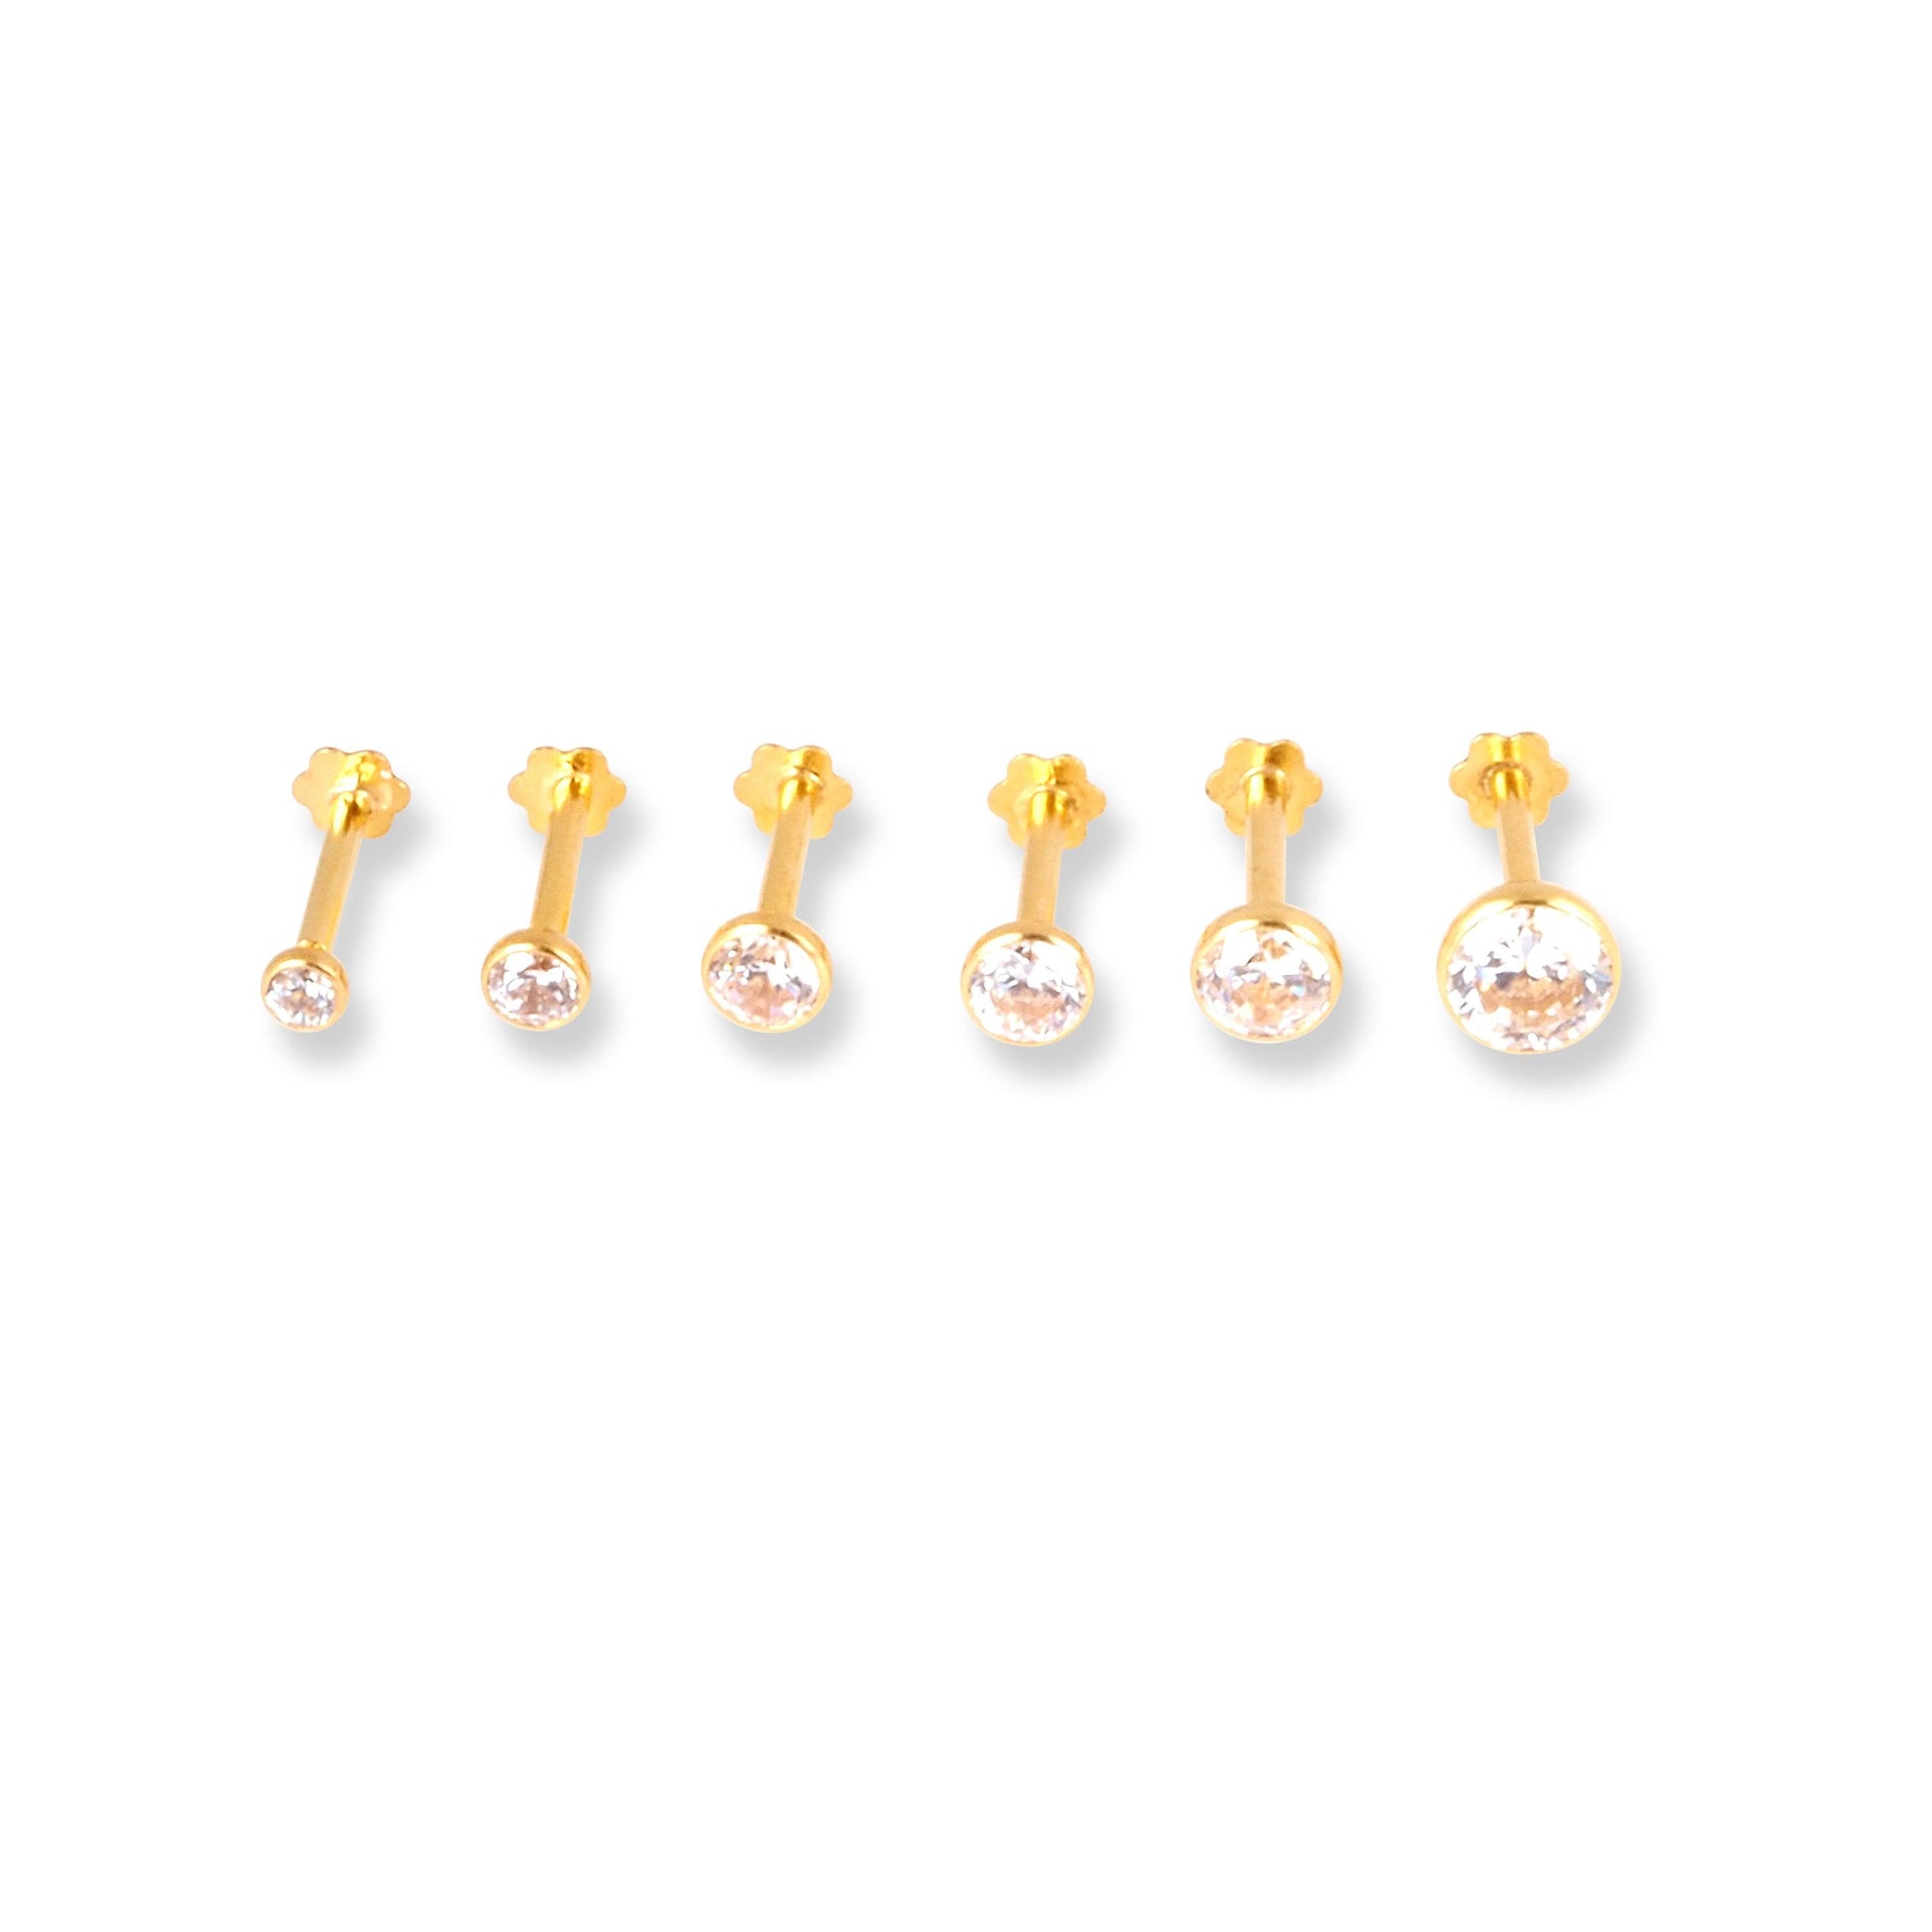 18ct Yellow Gold Screw Back Nose Stud set with Cubic Zirconia in a Rub Over (Bezel) Setting (2.25mm - 4mm) - Minar Jewellers